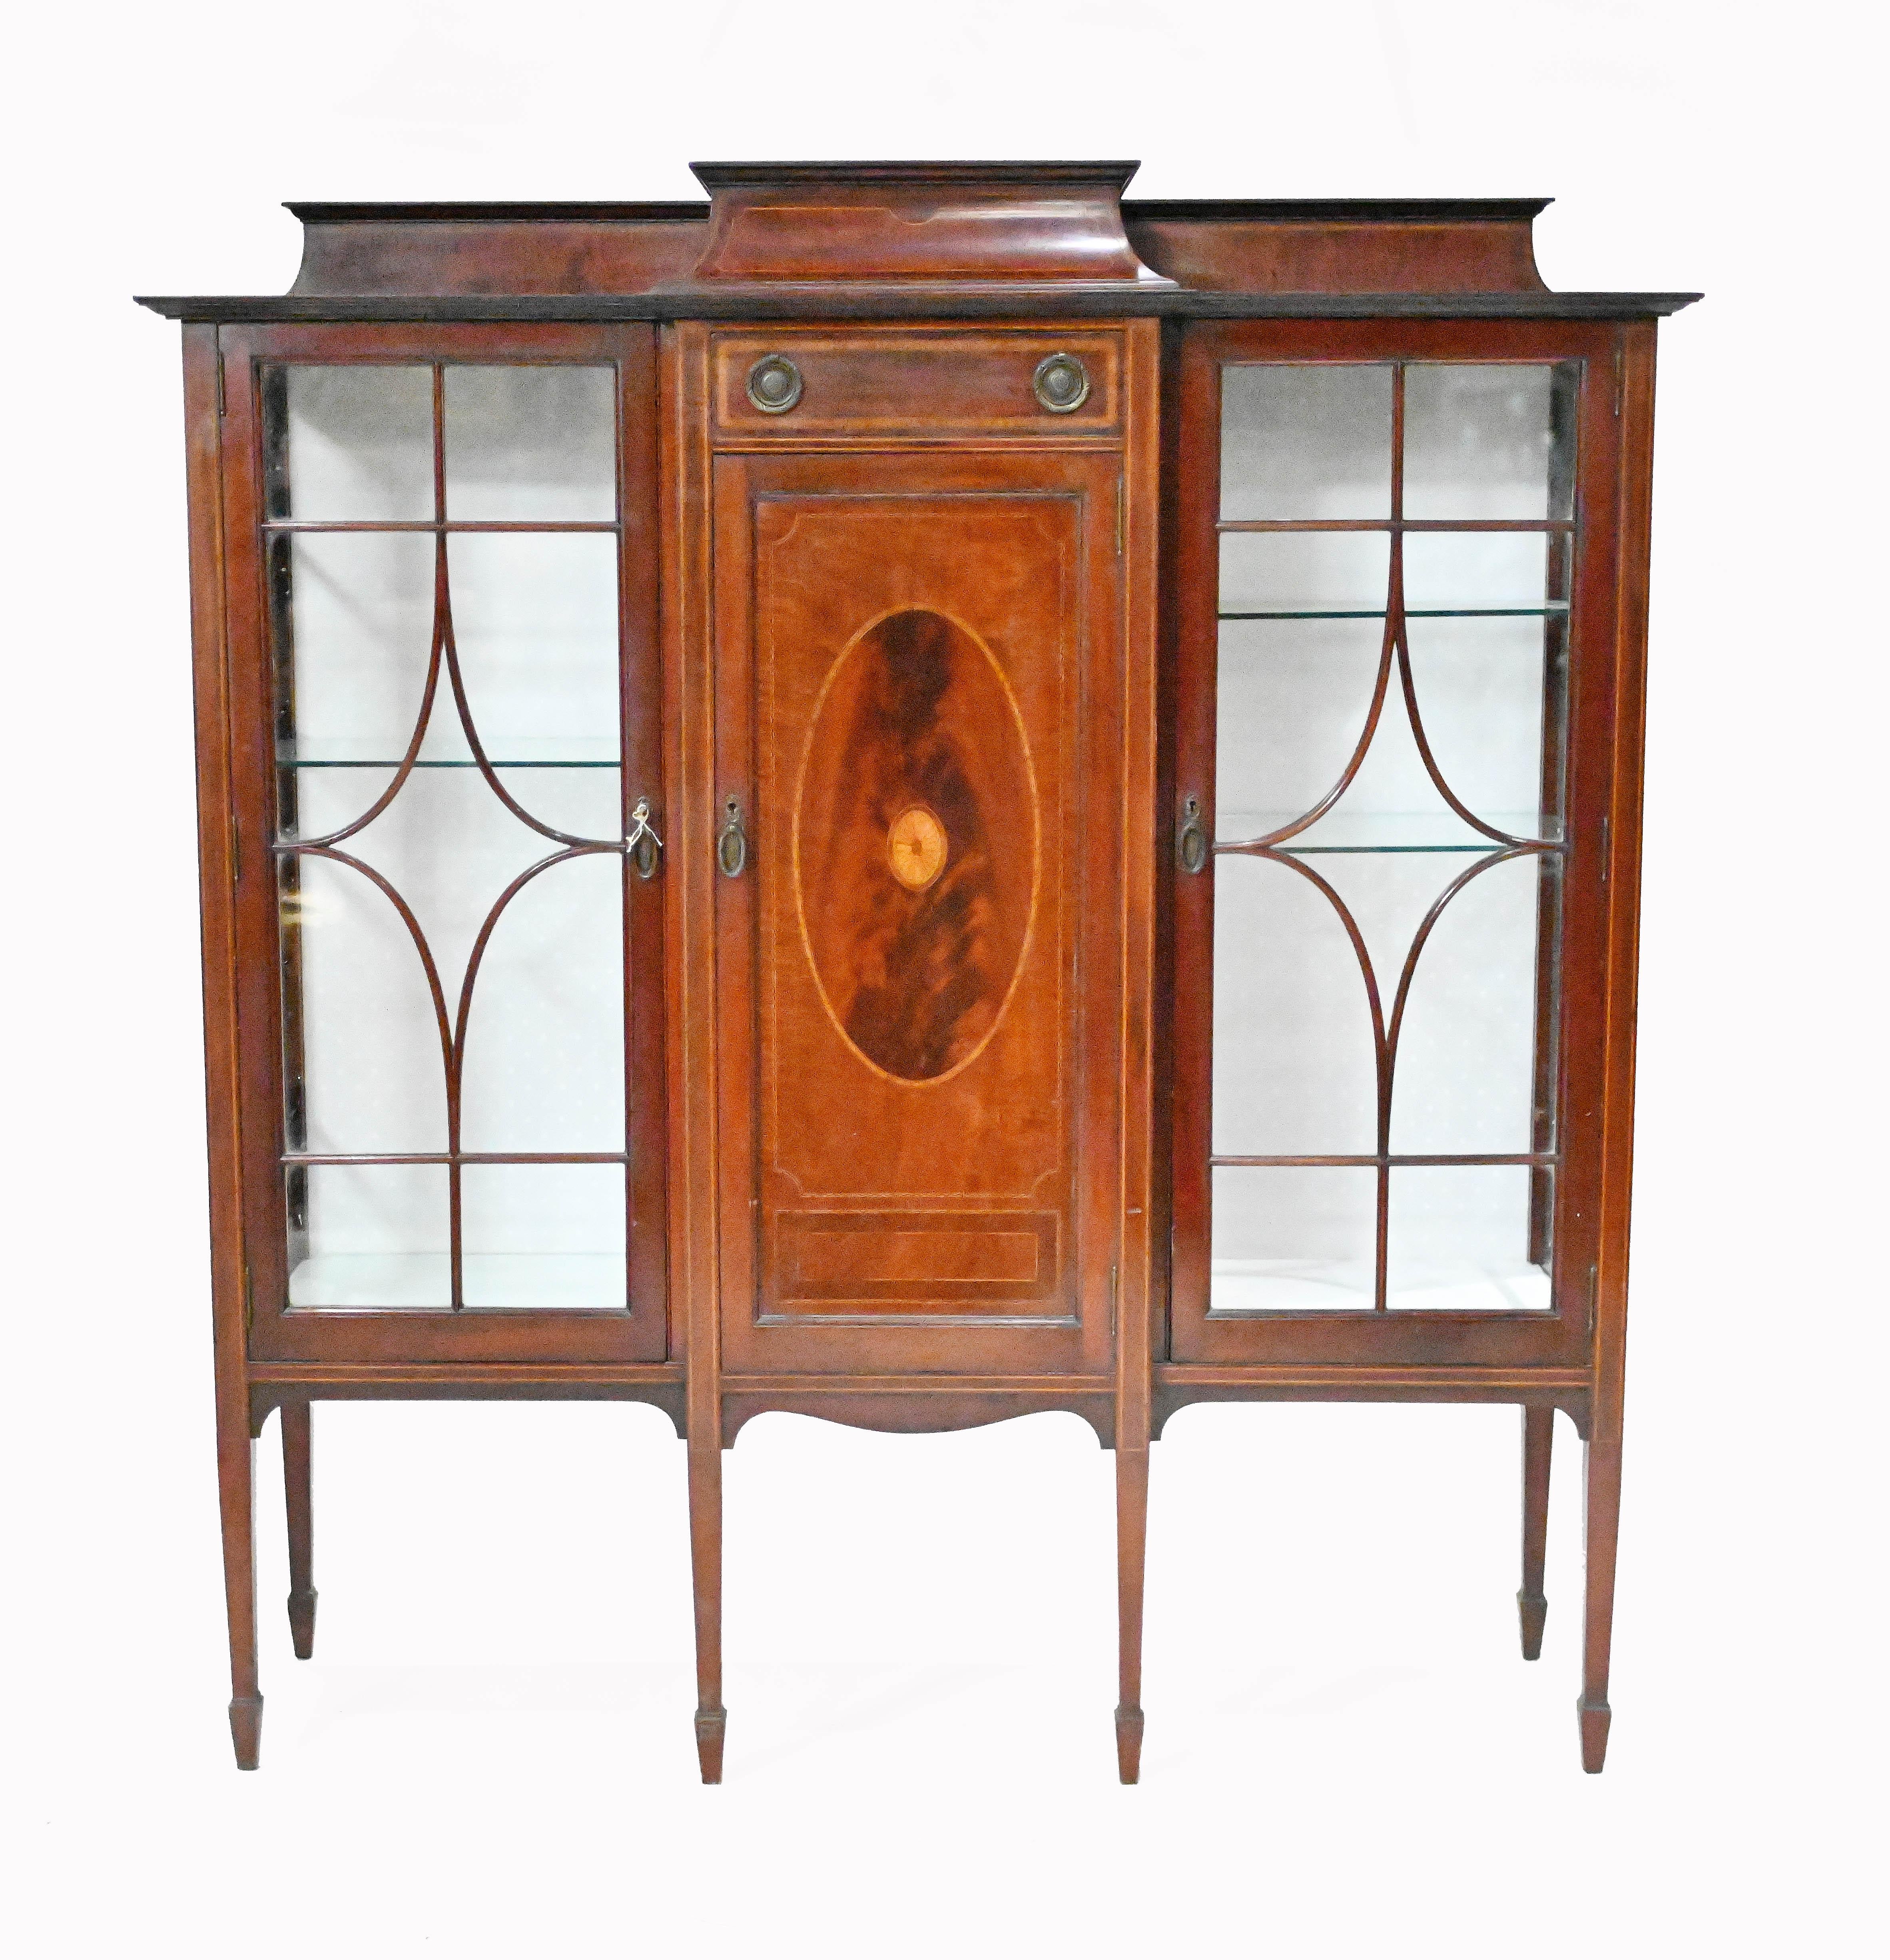 Gorgeous Edwardian display cabinet in the Sheraton manner
We date this to circa 1910 and it's crafted from mahogany with marquetry inlay work
Inlay motifs include shell motifs and satinwood crossbanding
Glass doors open out and feature astragal